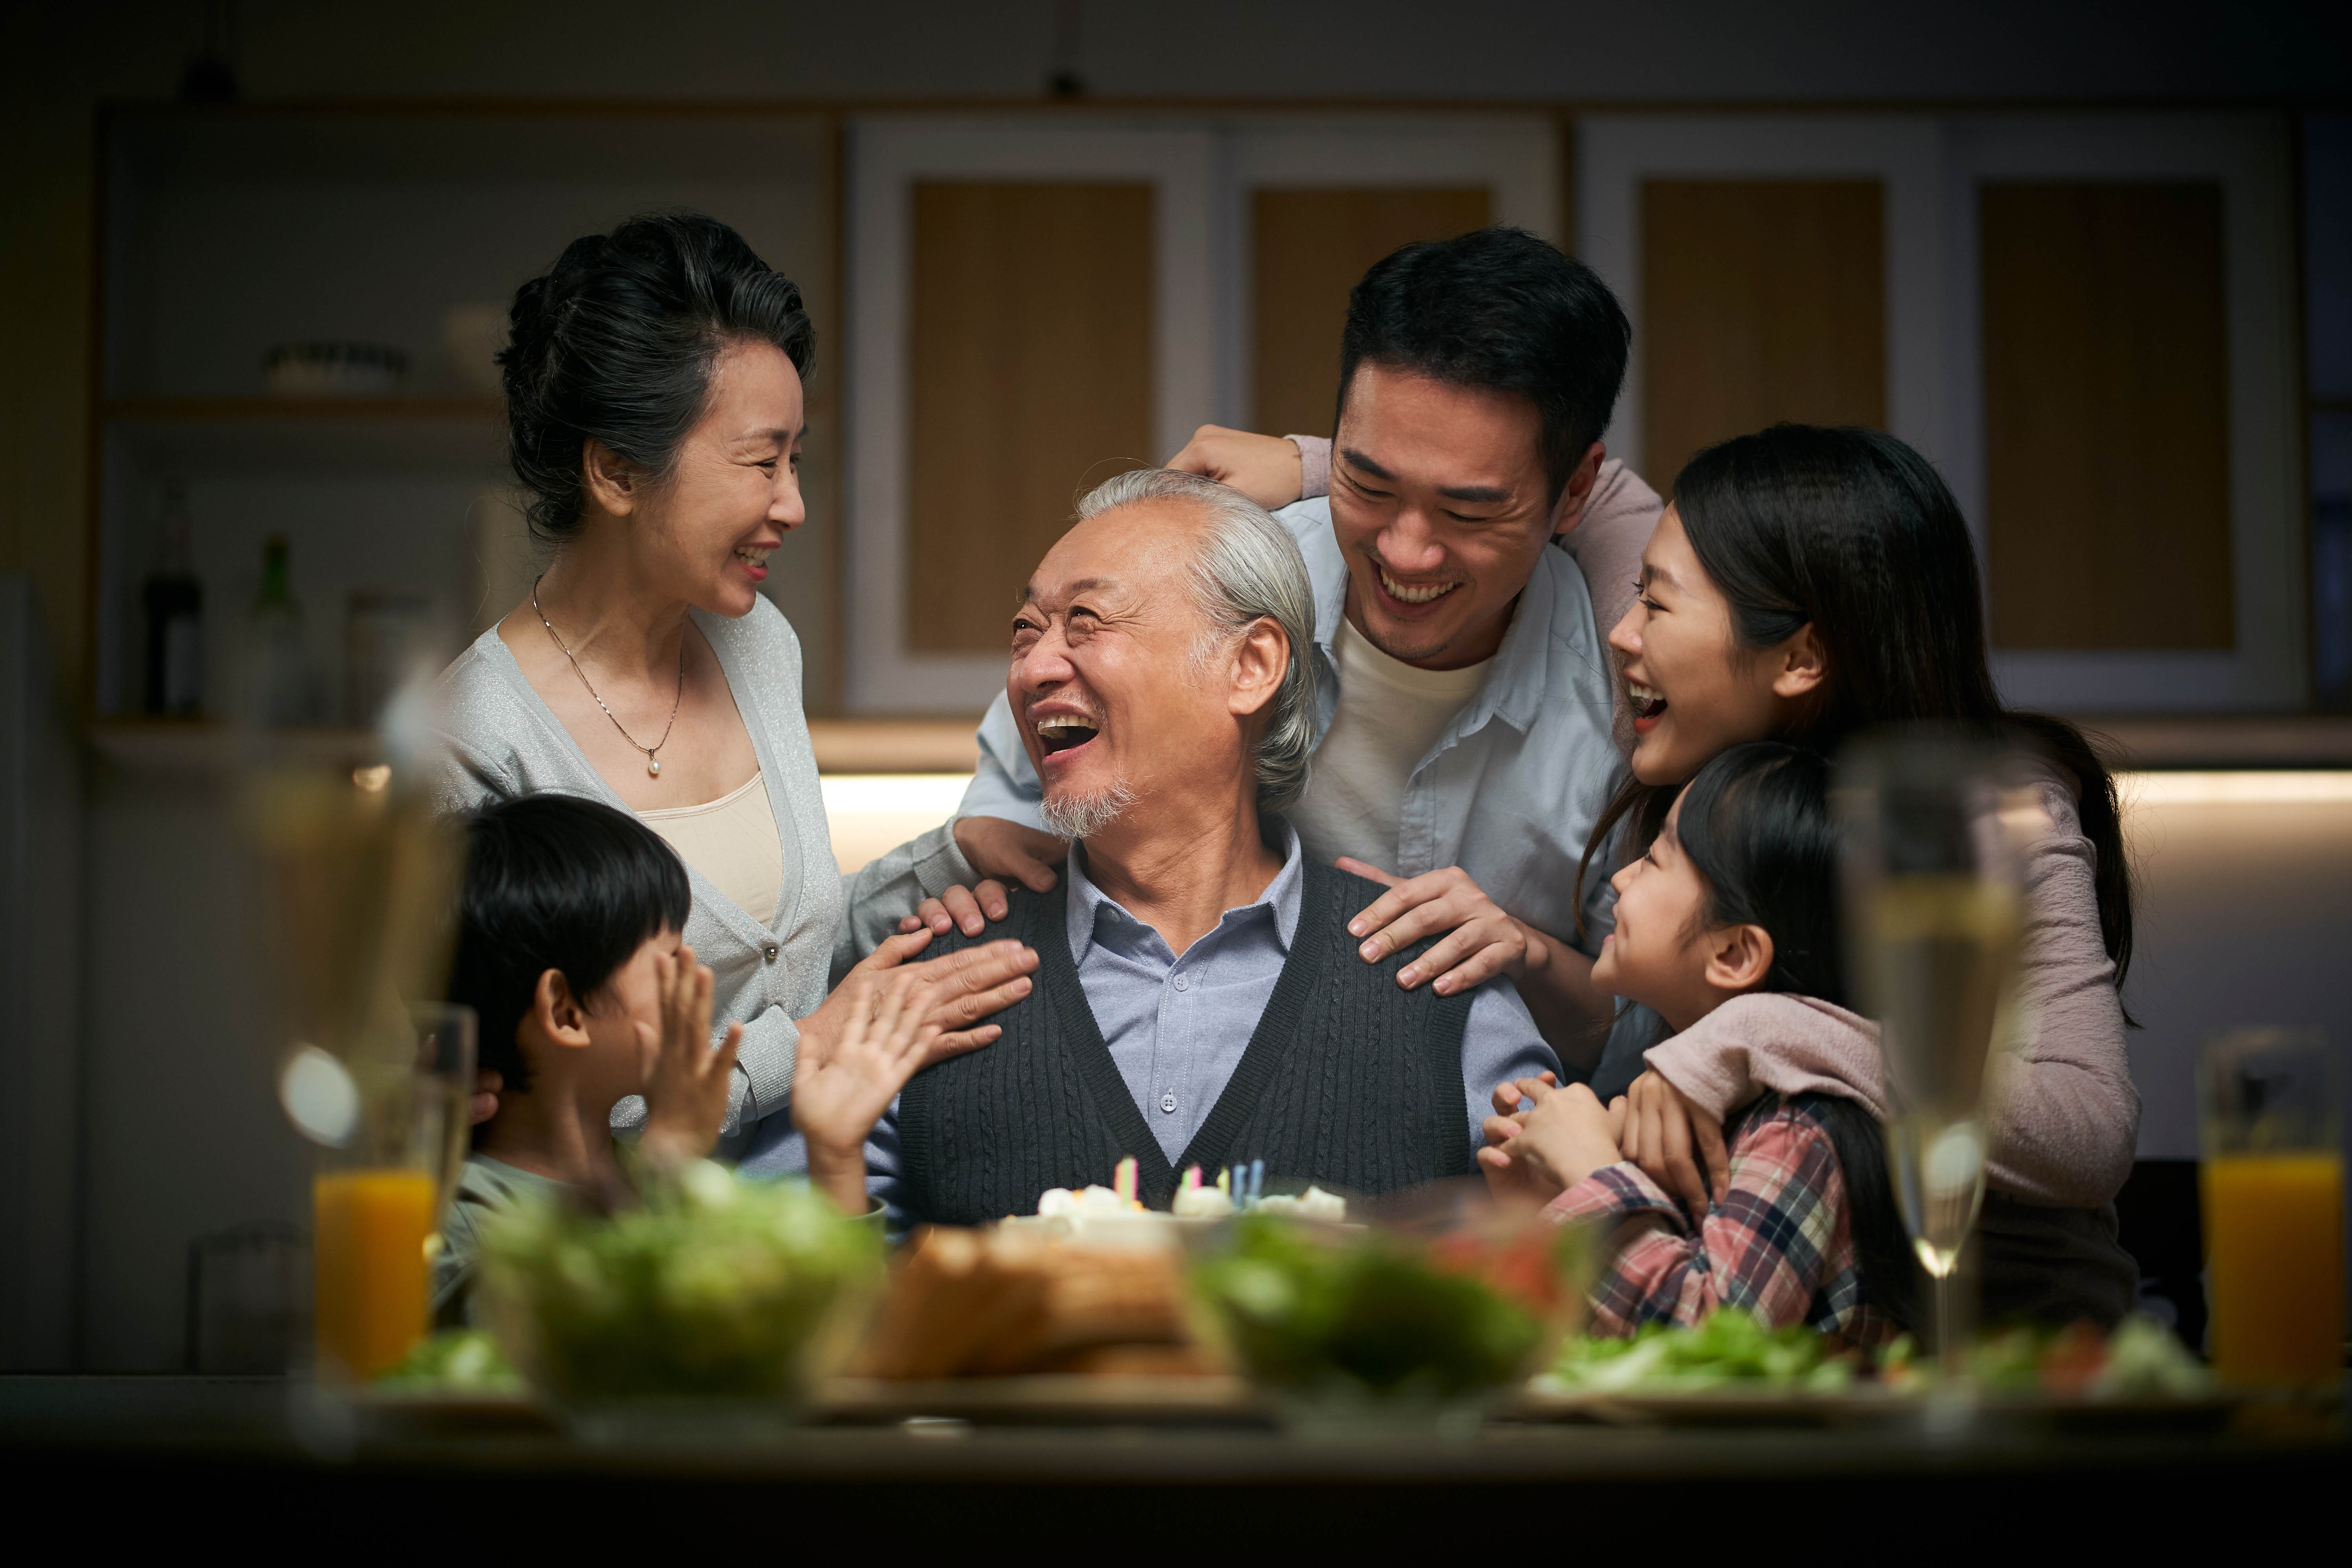 Asian family, centered around the grandfather with his daughter, her children, and two young children around